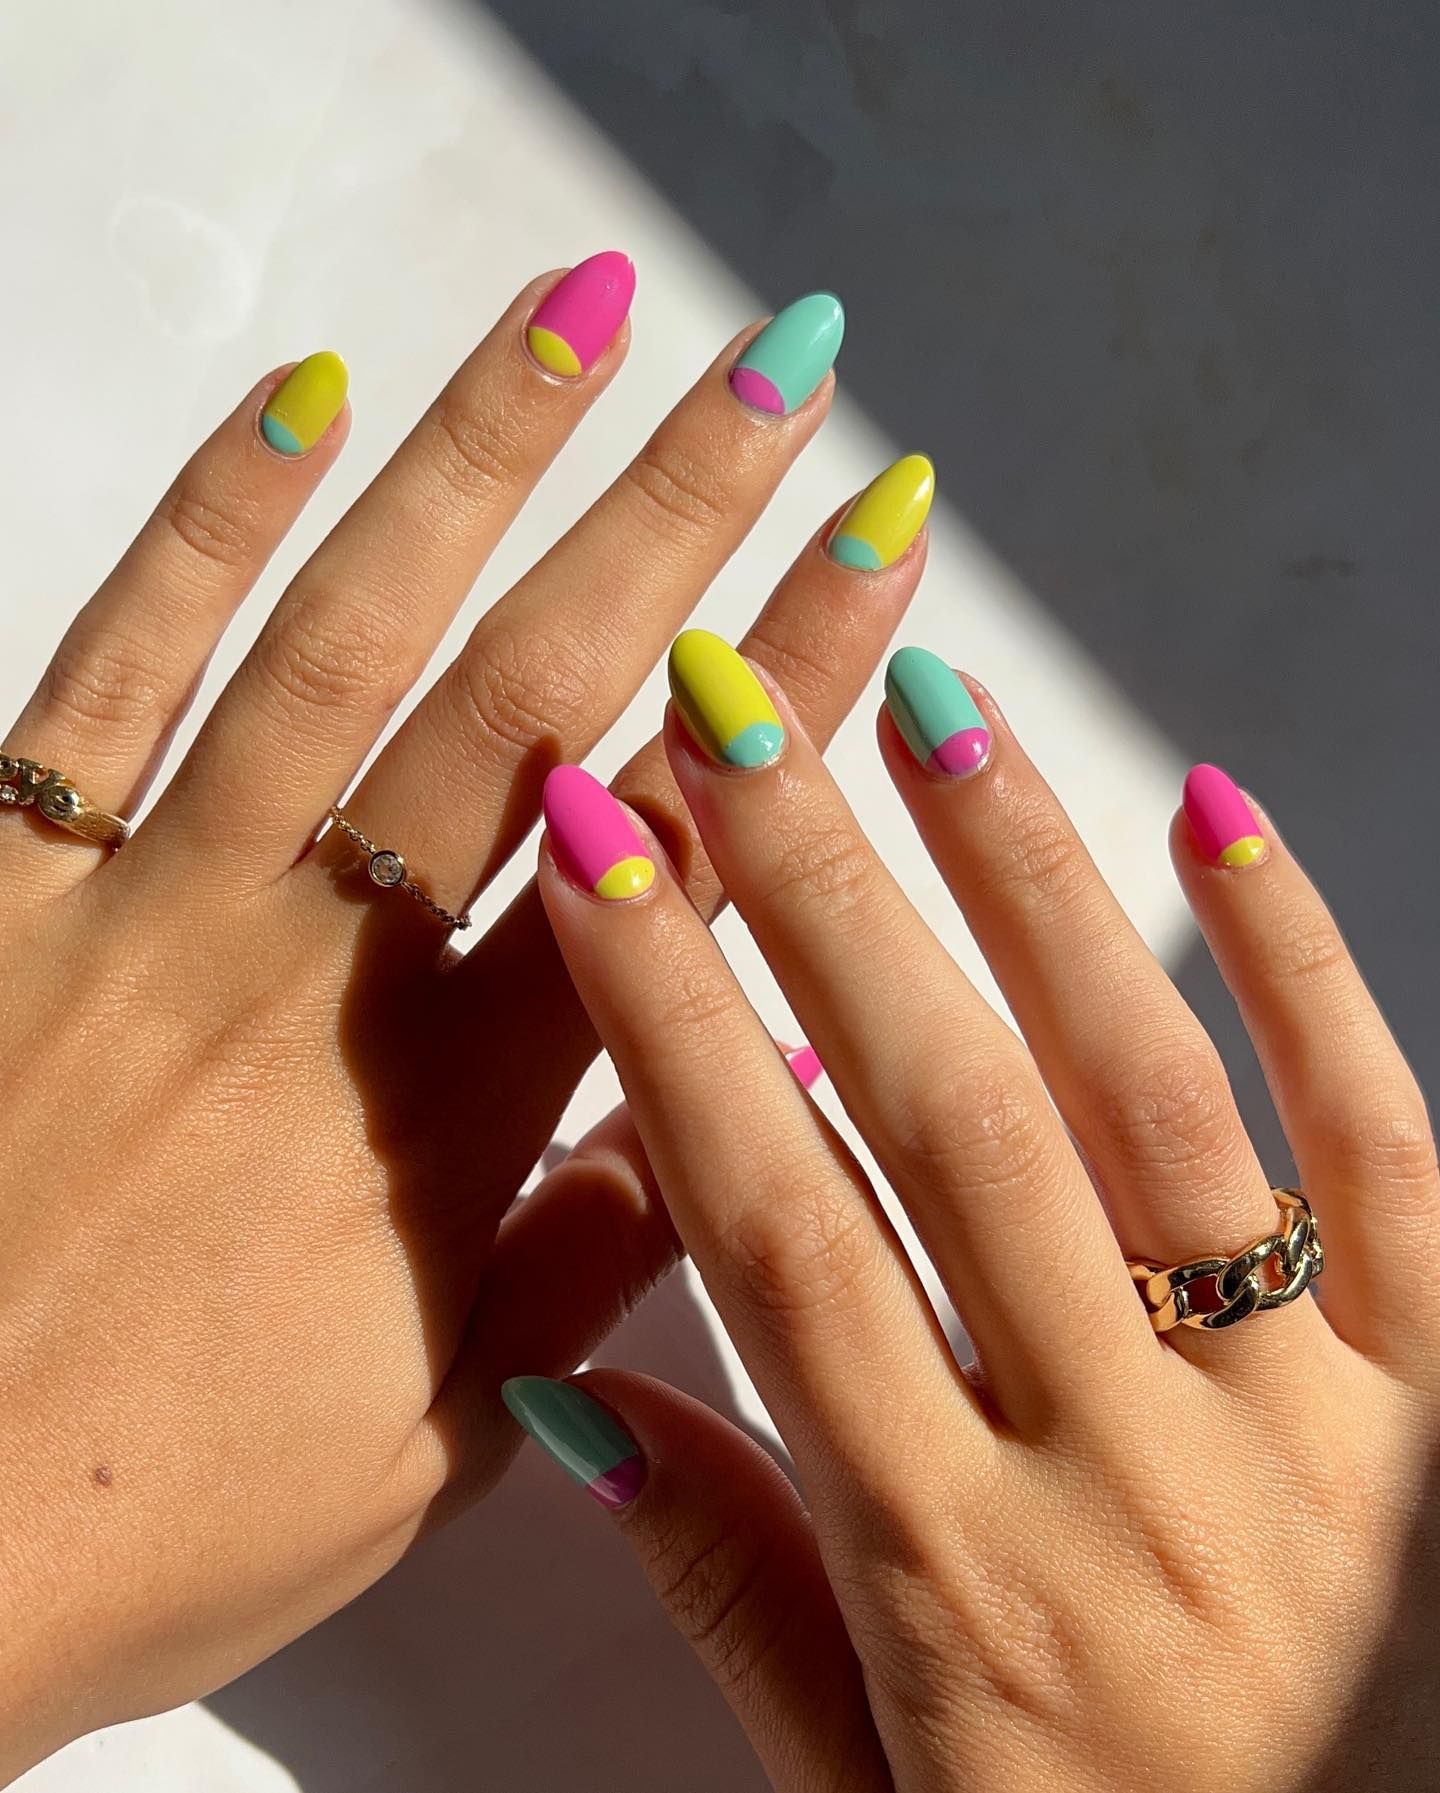 50+ Summer Nails Perfect For Your Next Mani! - The Pink Brunette